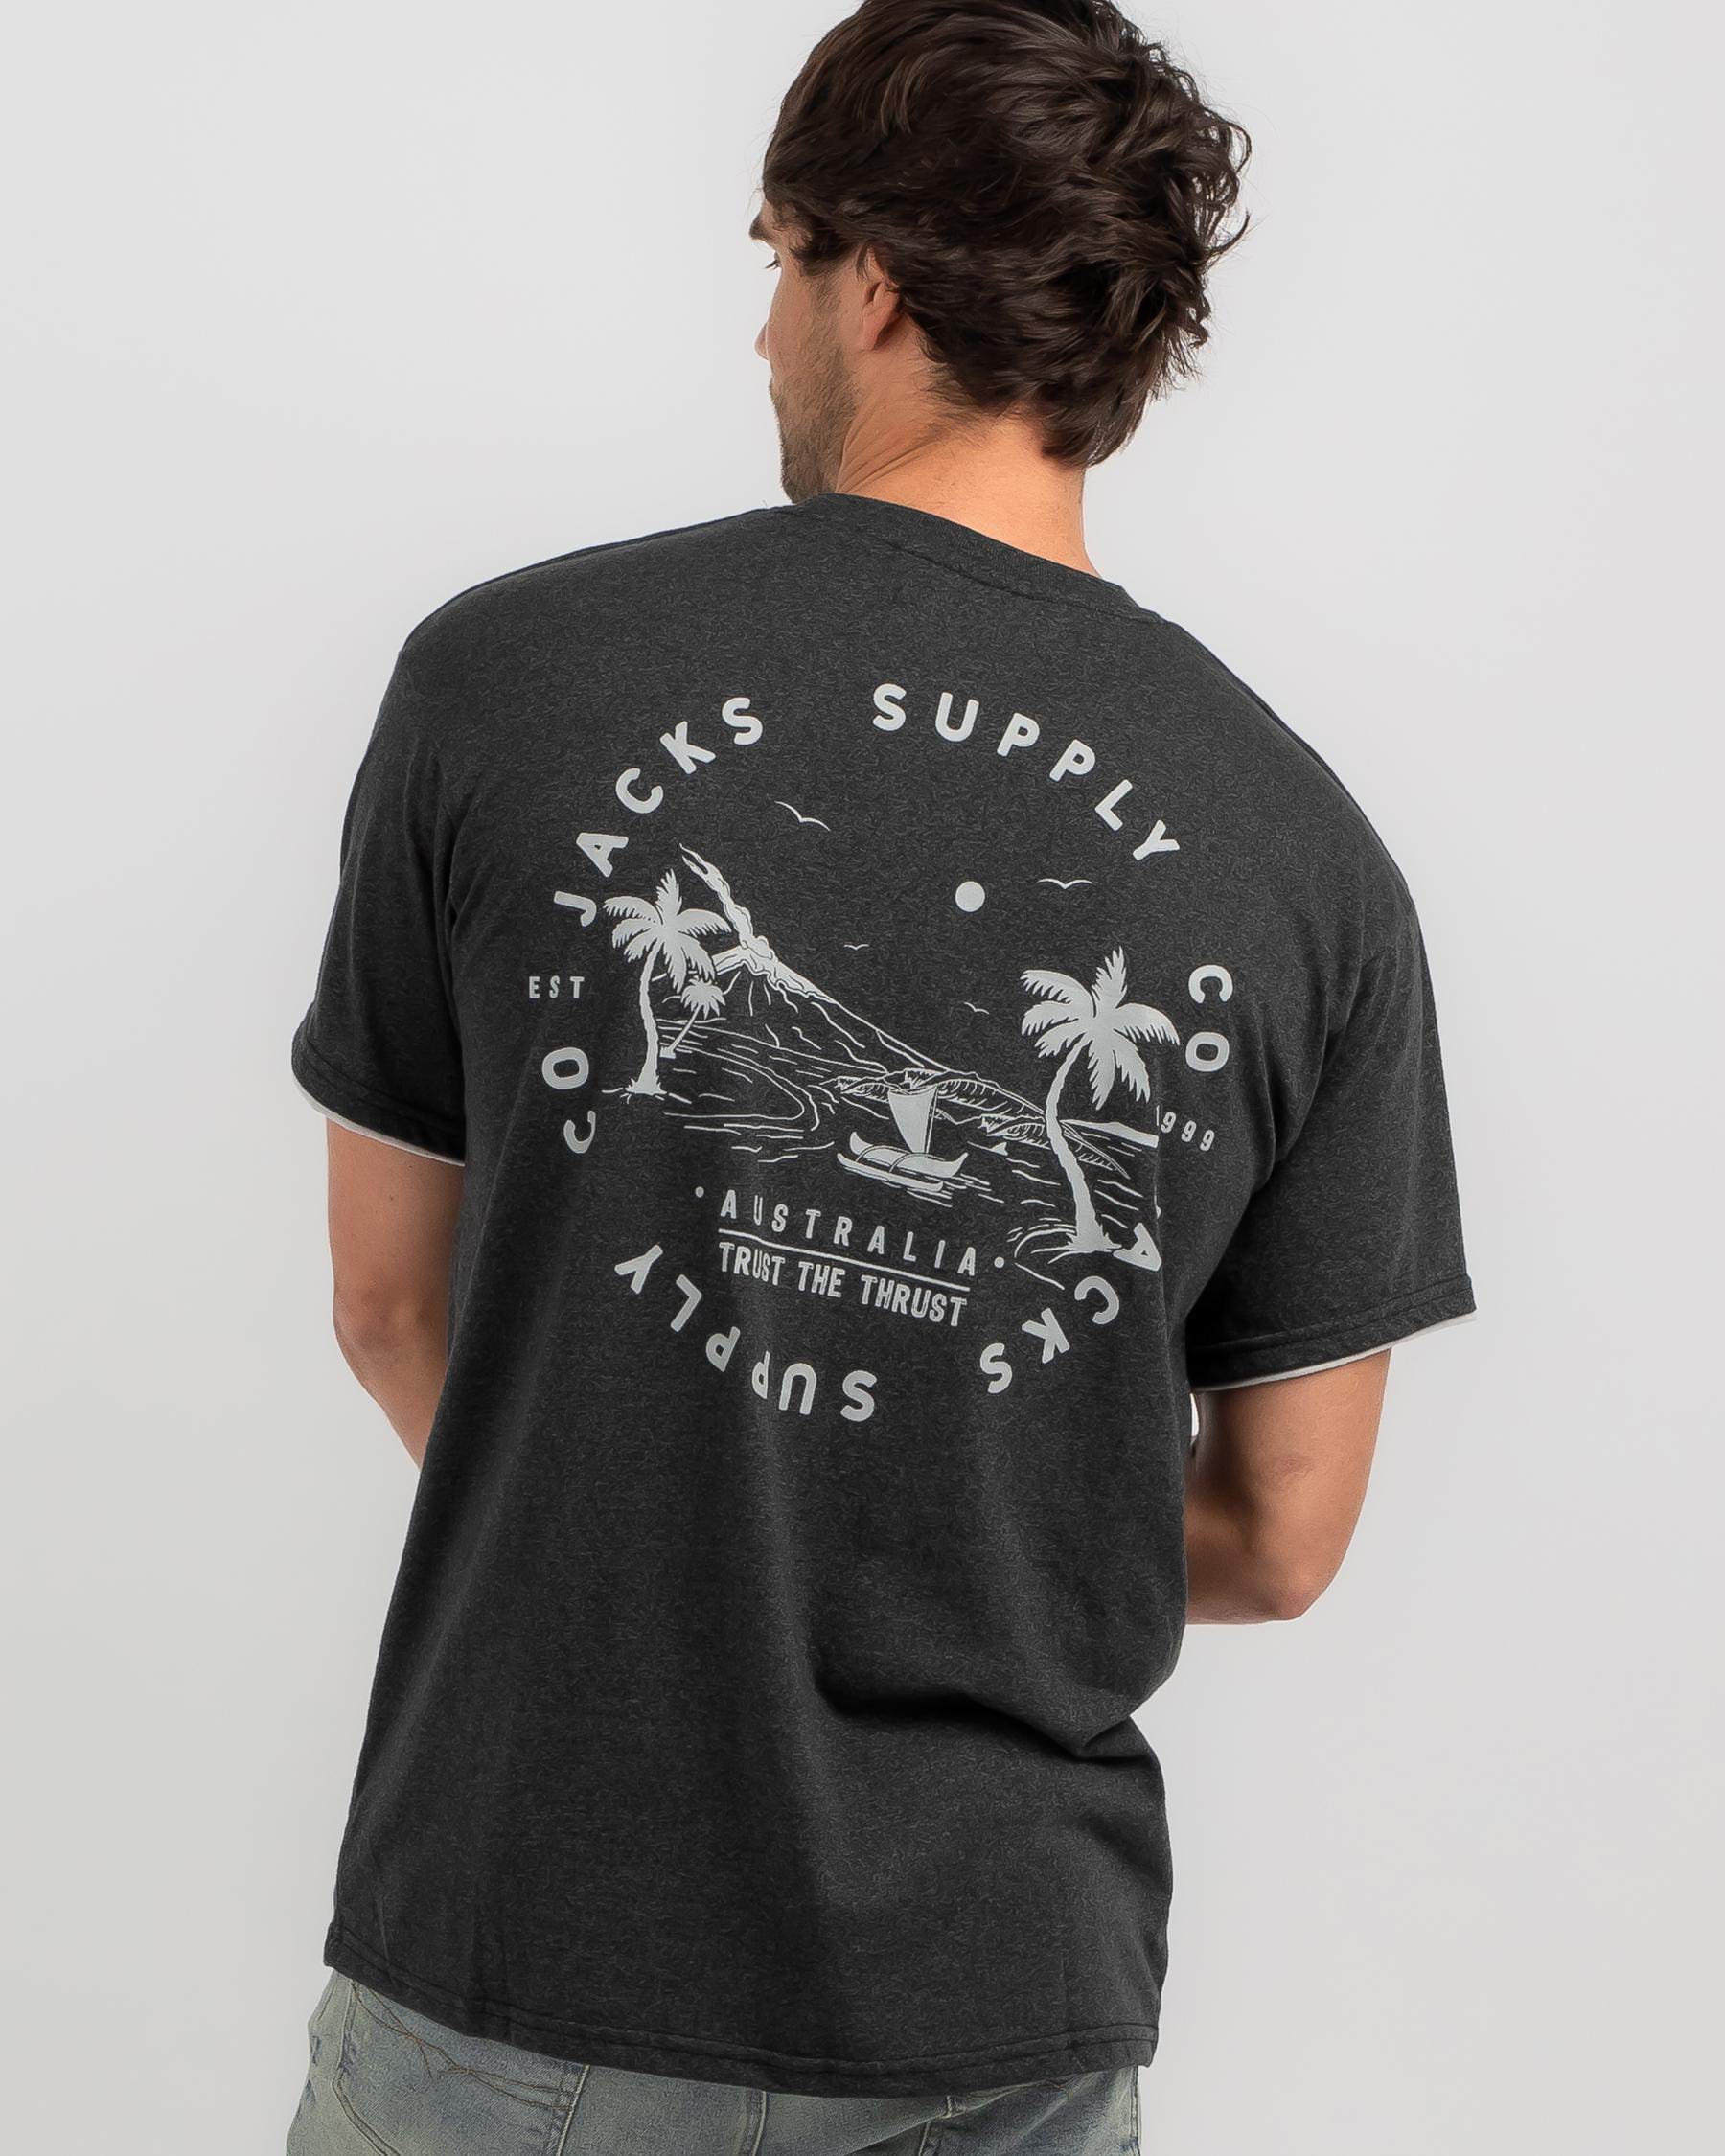 Shop Jacks Reclined T-Shirt In Black - Fast Shipping & Easy Returns ...